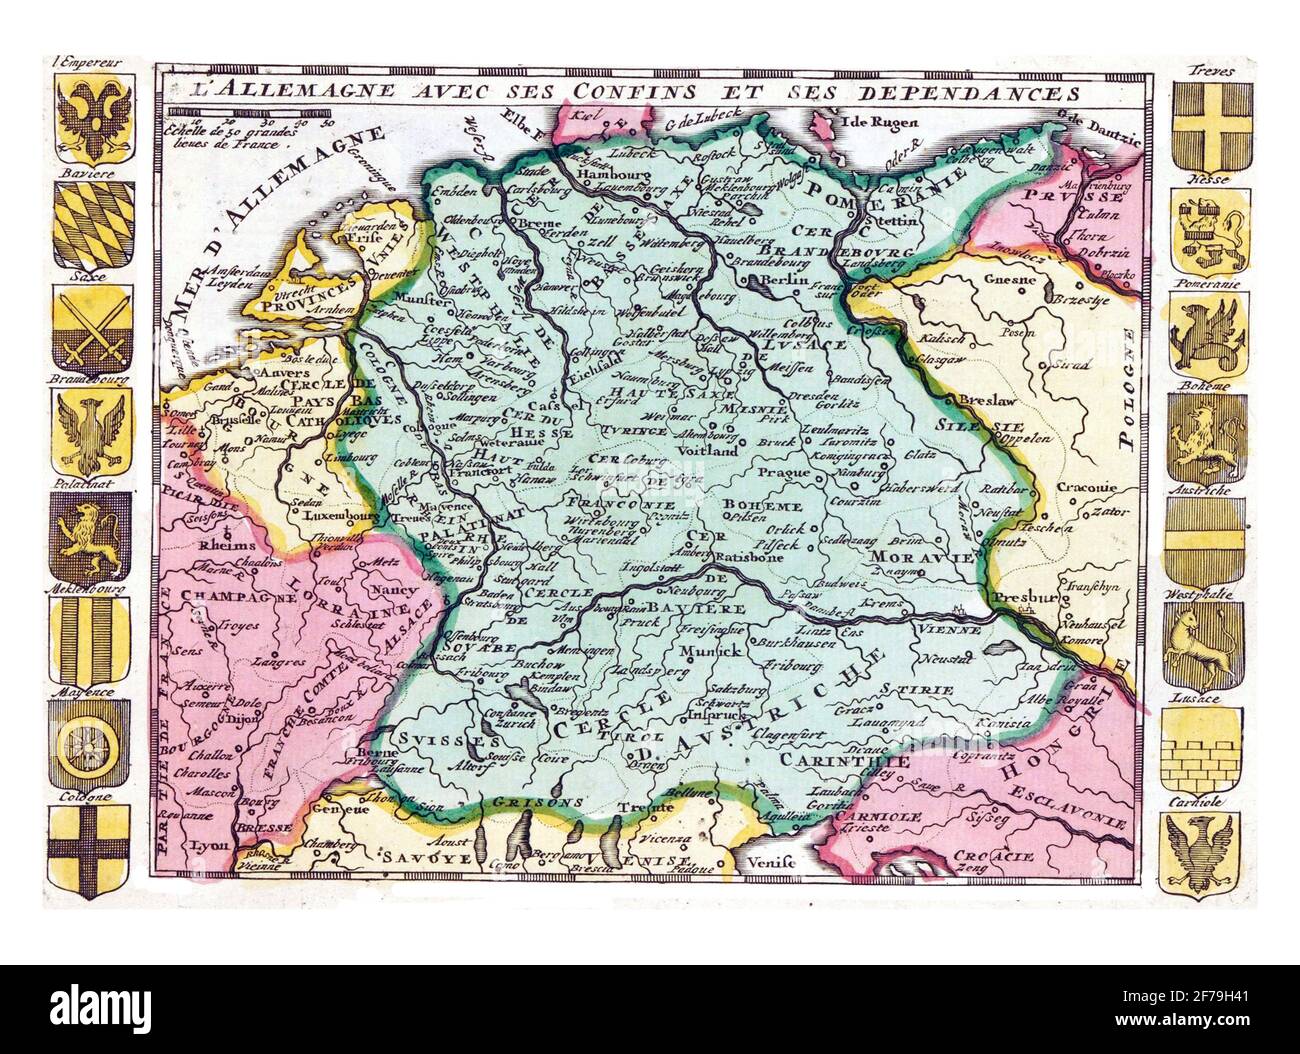 Map of Germany, vintage engraving. Stock Photo